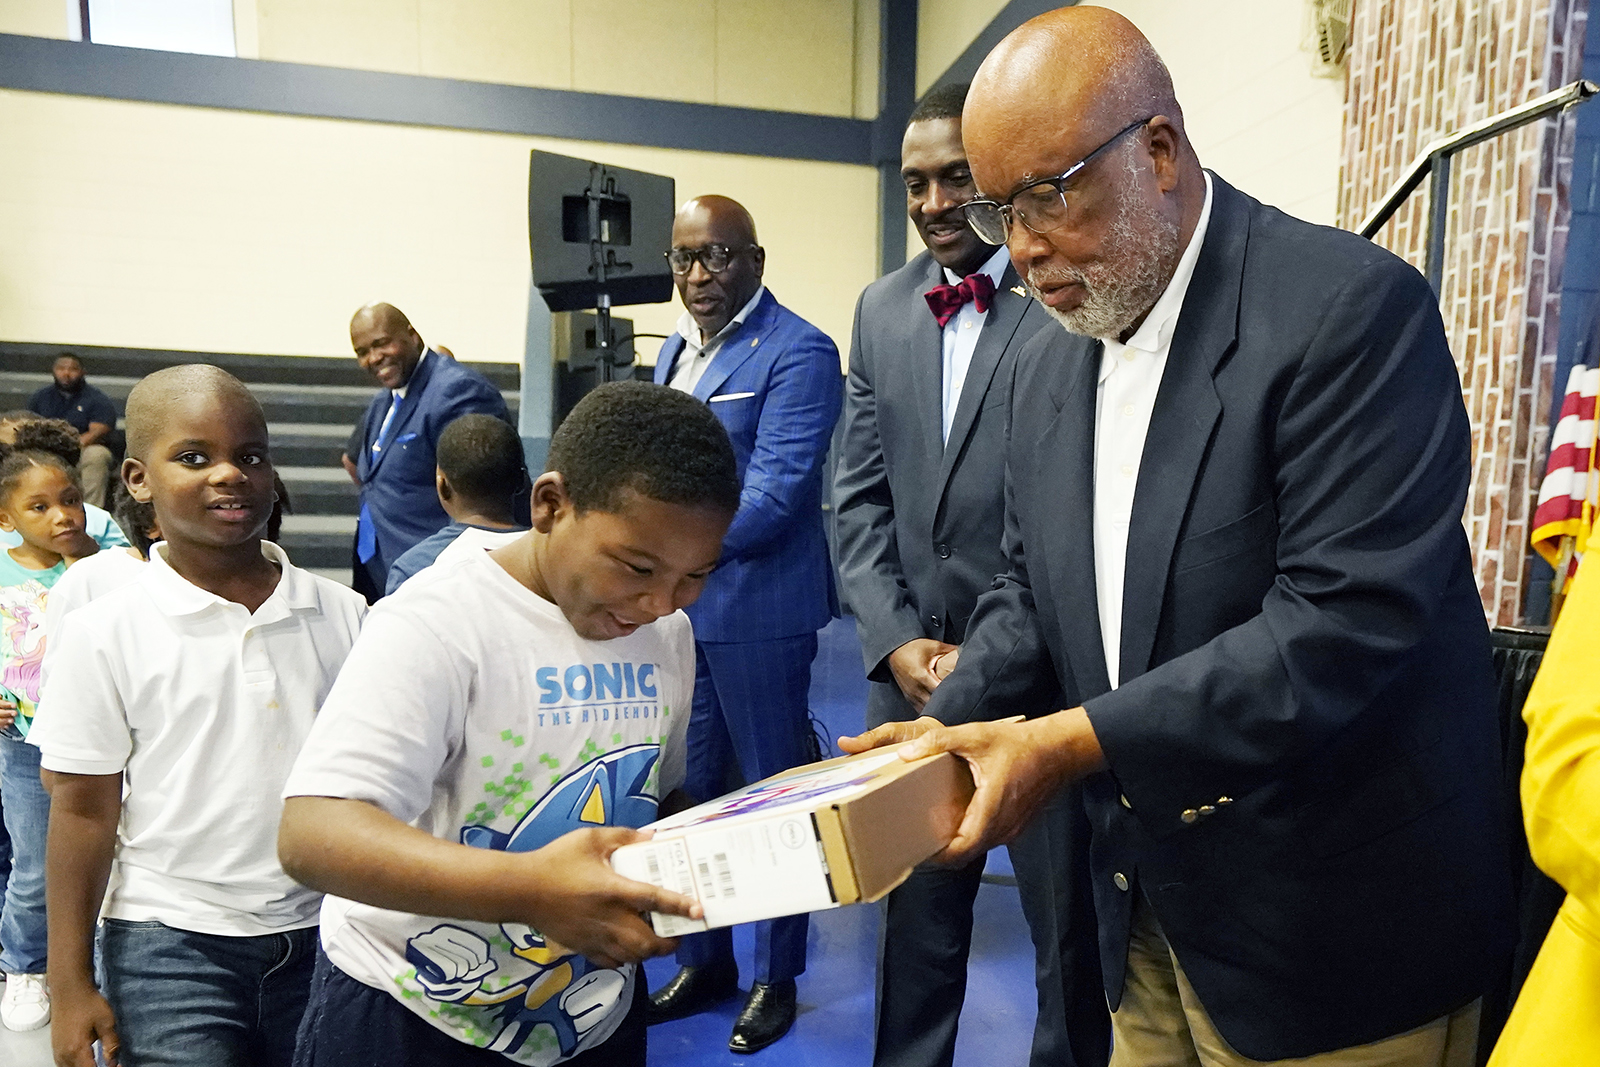 U.S. Rep. Bennie Thompson, D-Miss., right, hands a Bolton-Edwards Elementary/Middle School student a new laptop during a celebration hosted by media and technology company, Comcast, announcing that they completed a broadband expansion effort in the neighboring towns of Bolton and Edwards, Tuesday, Aug. 22, 2023, in Bolton, Miss. Nearly 400 laptops were donated to students of the two schools as part of the celebration. (AP Photo/Rogelio V. Solis)